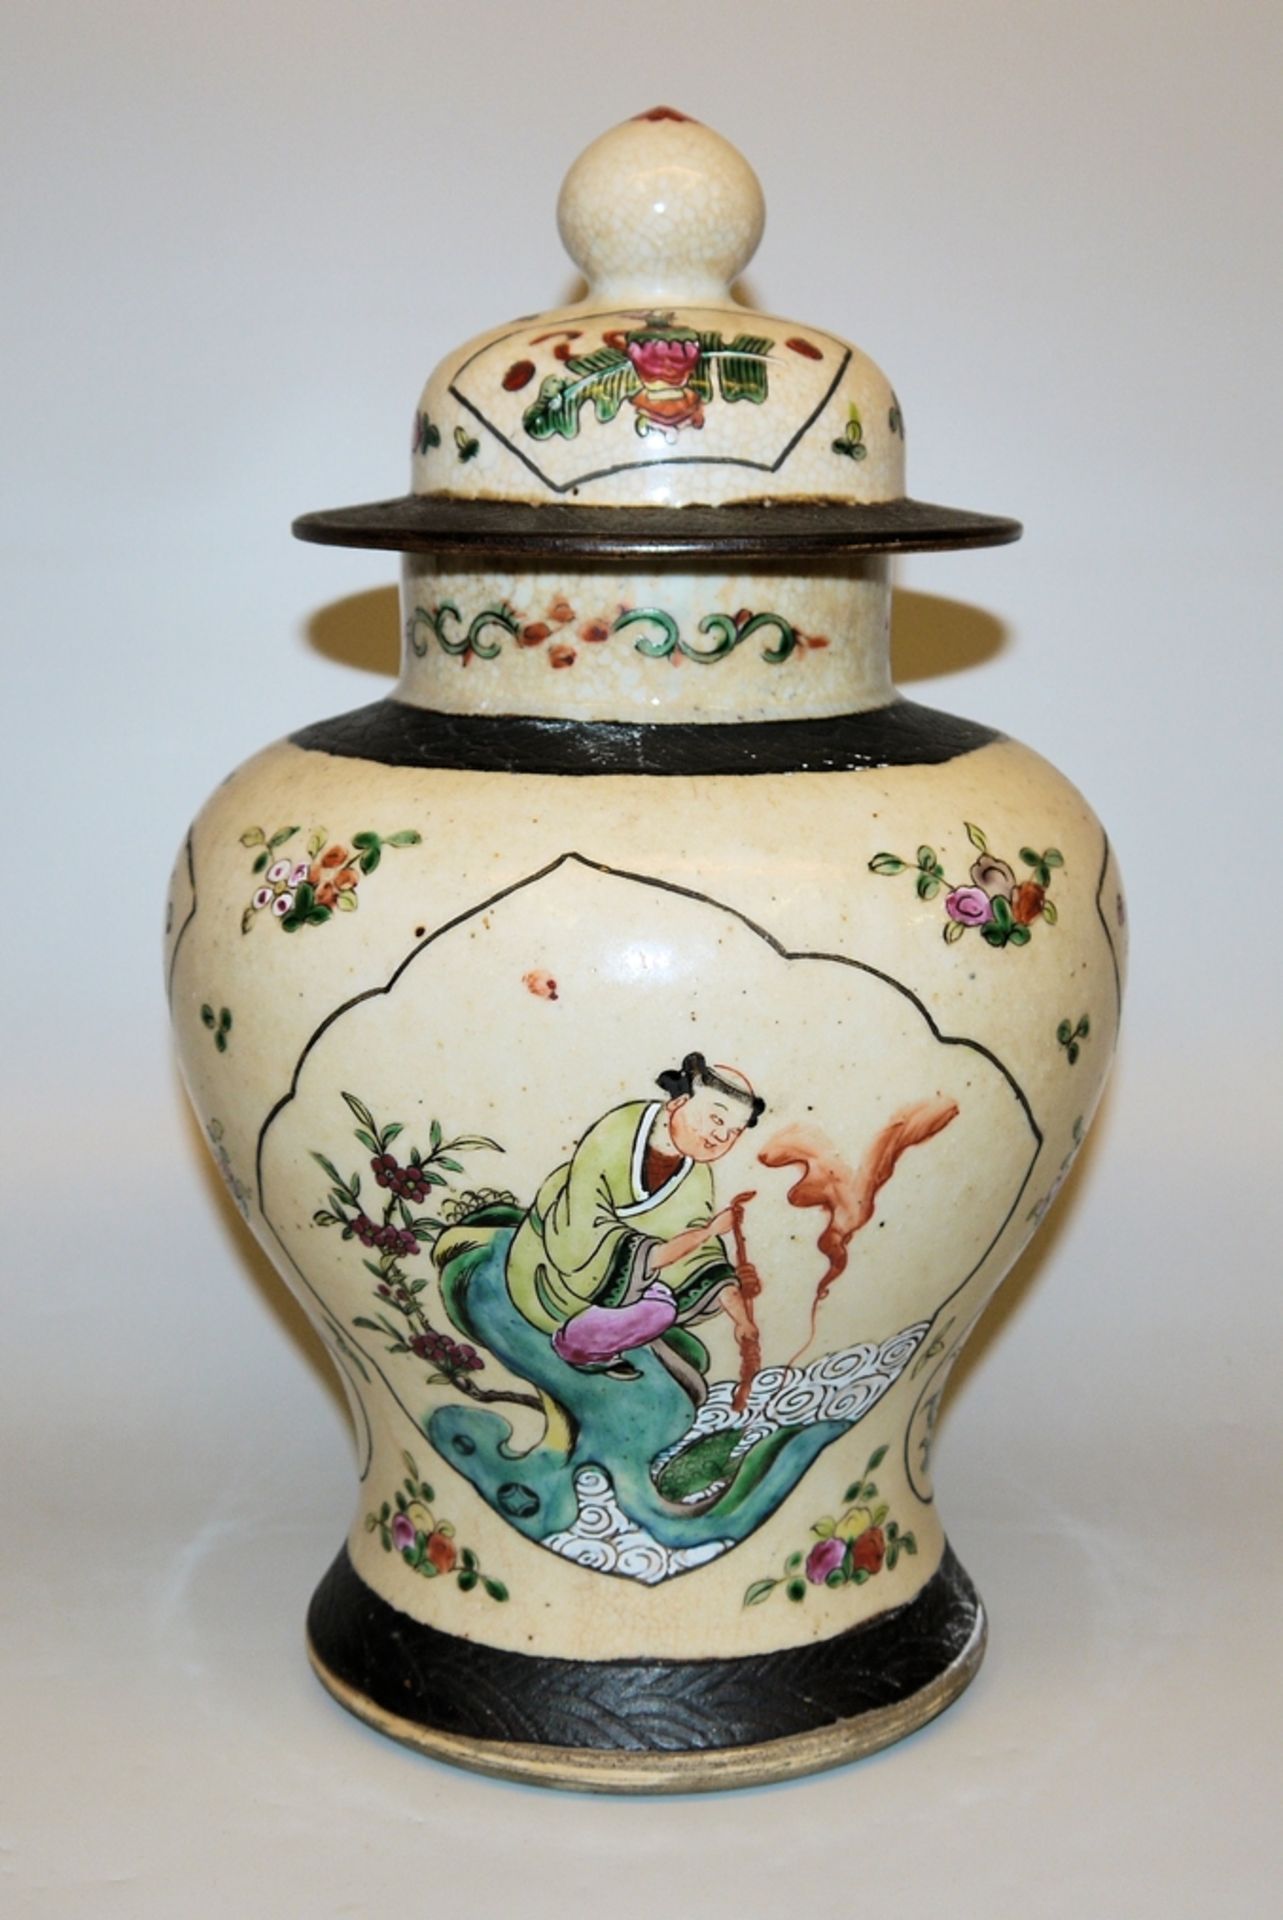 Baluster vase with legendary scenes, South China c. 1900